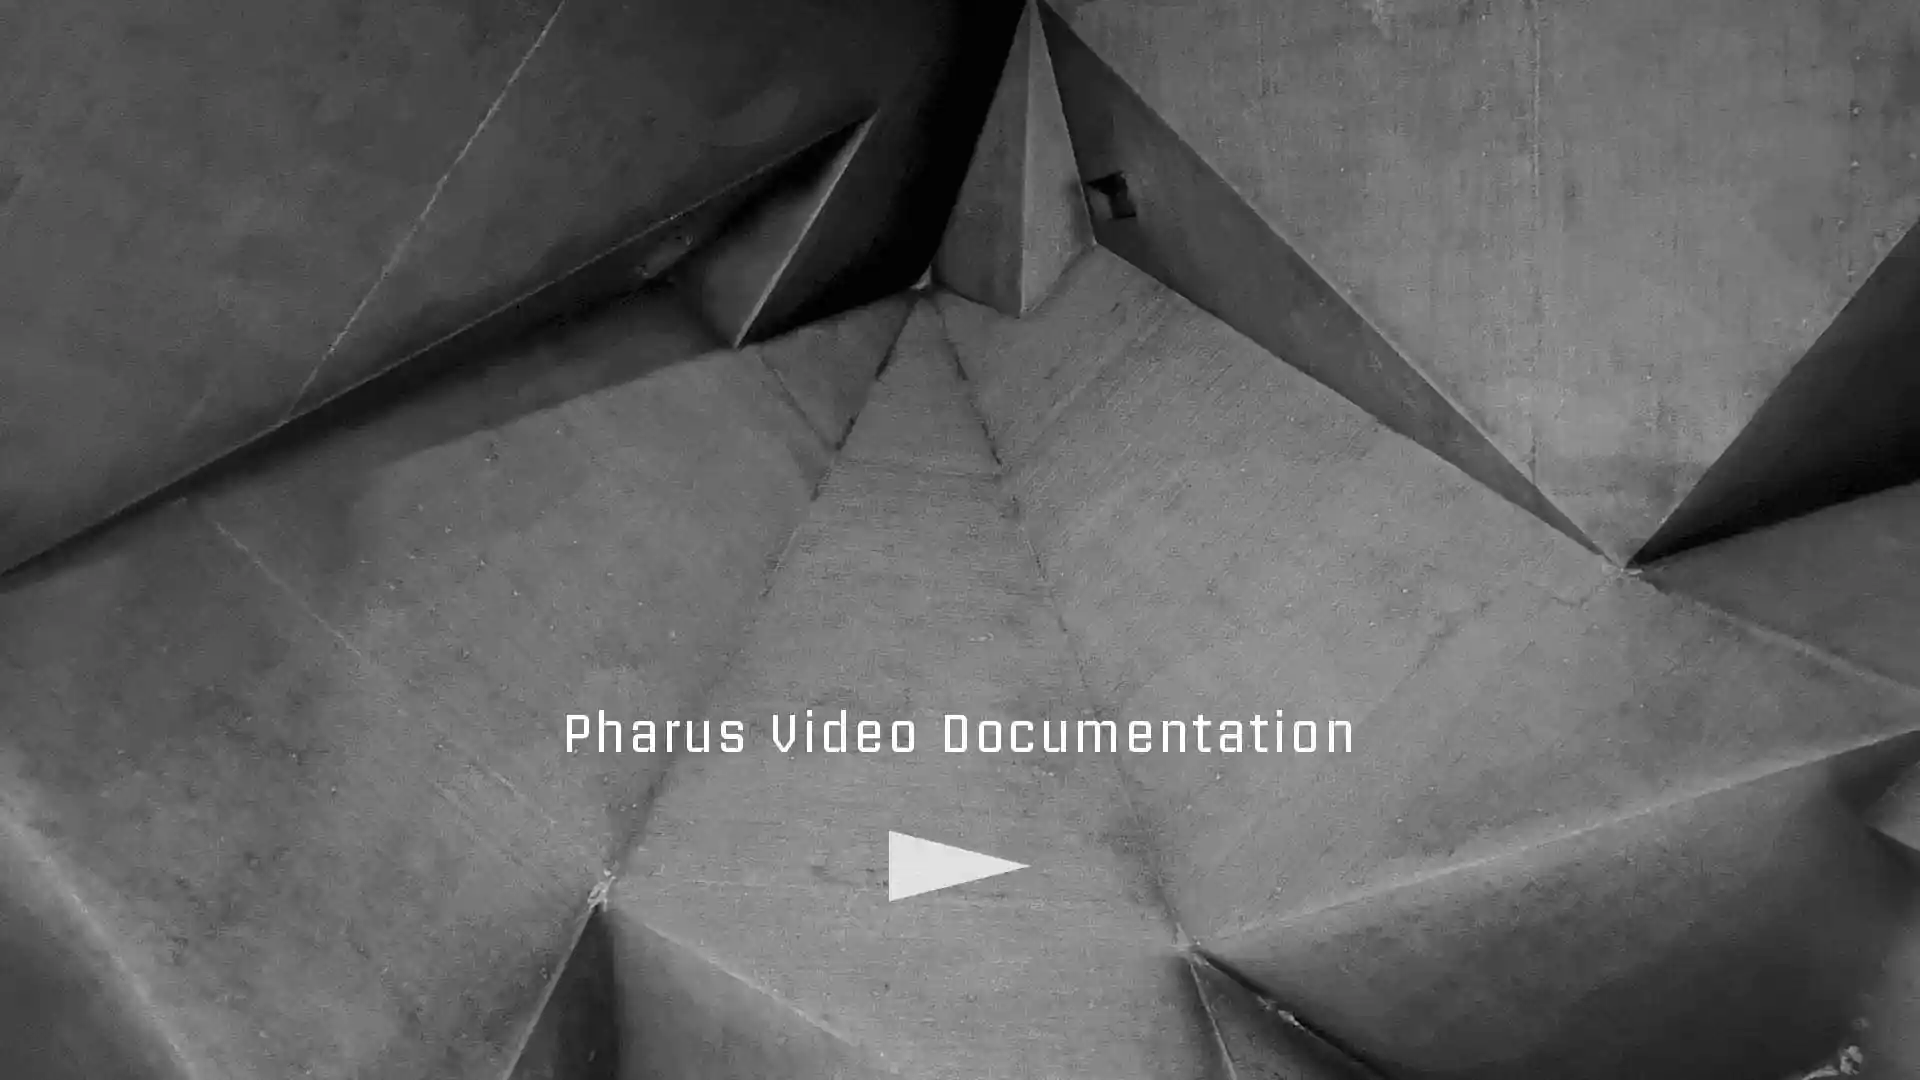 Link to PHARUS video documentation